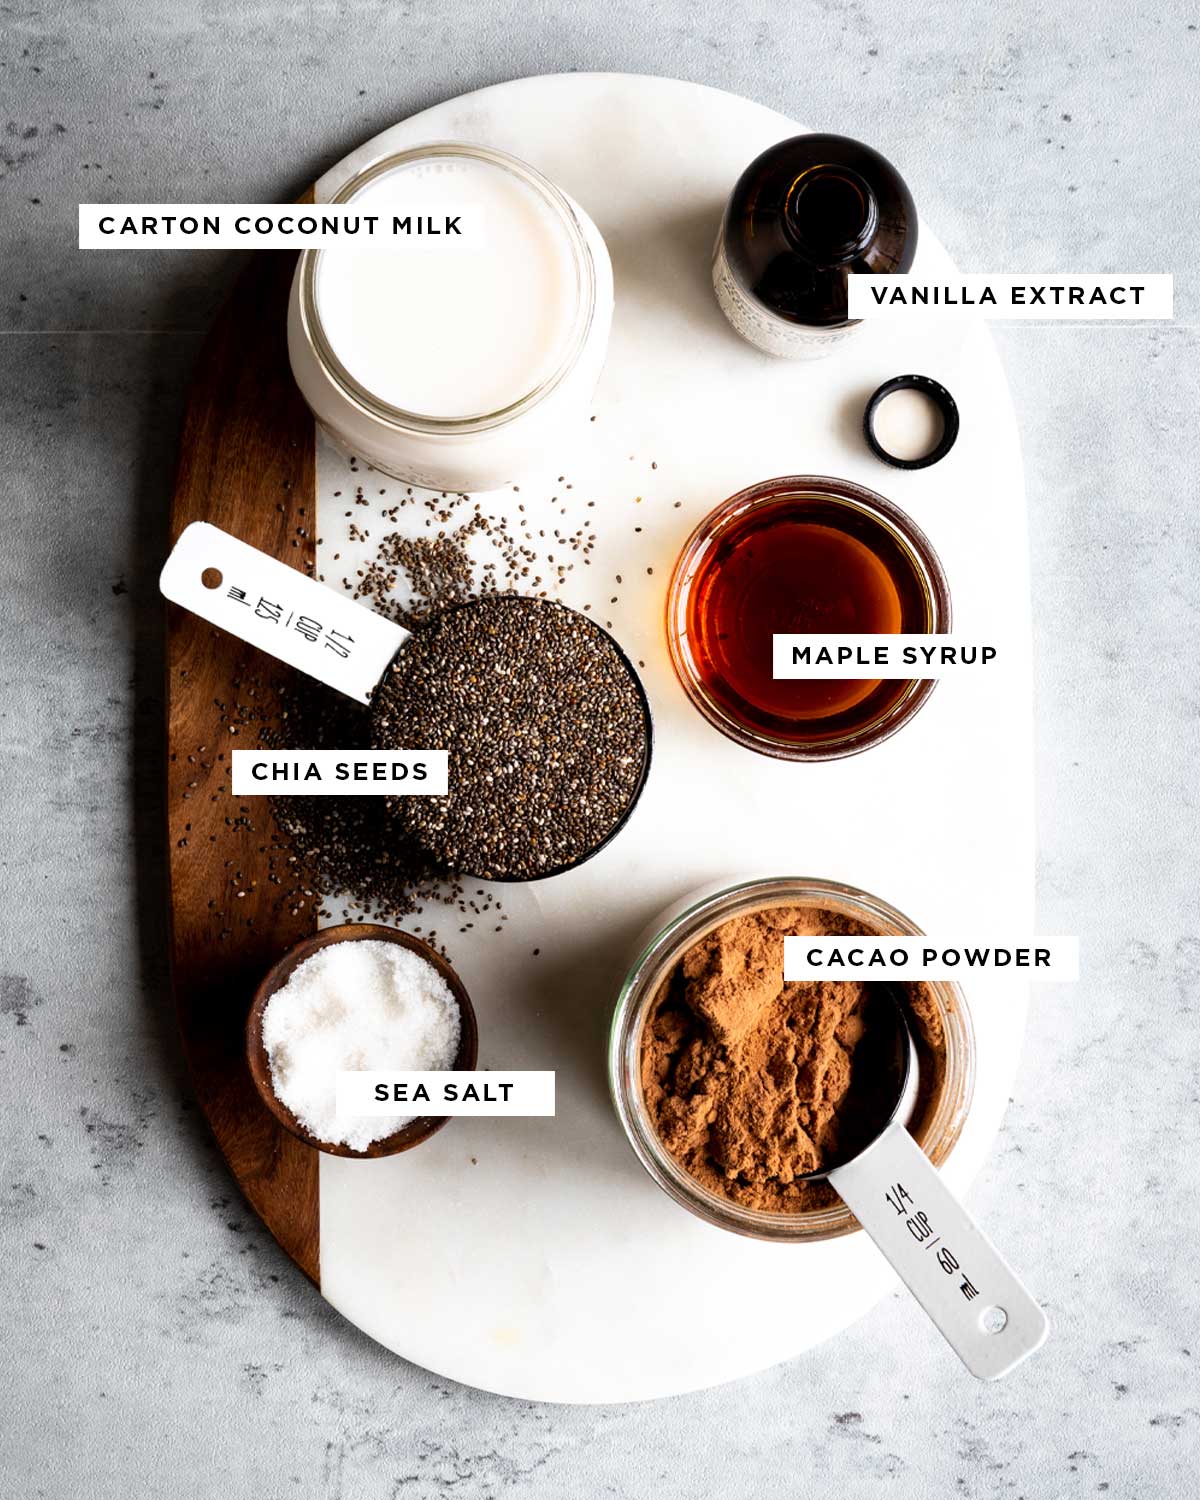 ingredients for how to make chia pudding including carton coconut milk, vanilla extract, maple syrup, chia seeds, sea salt and cacao powder.